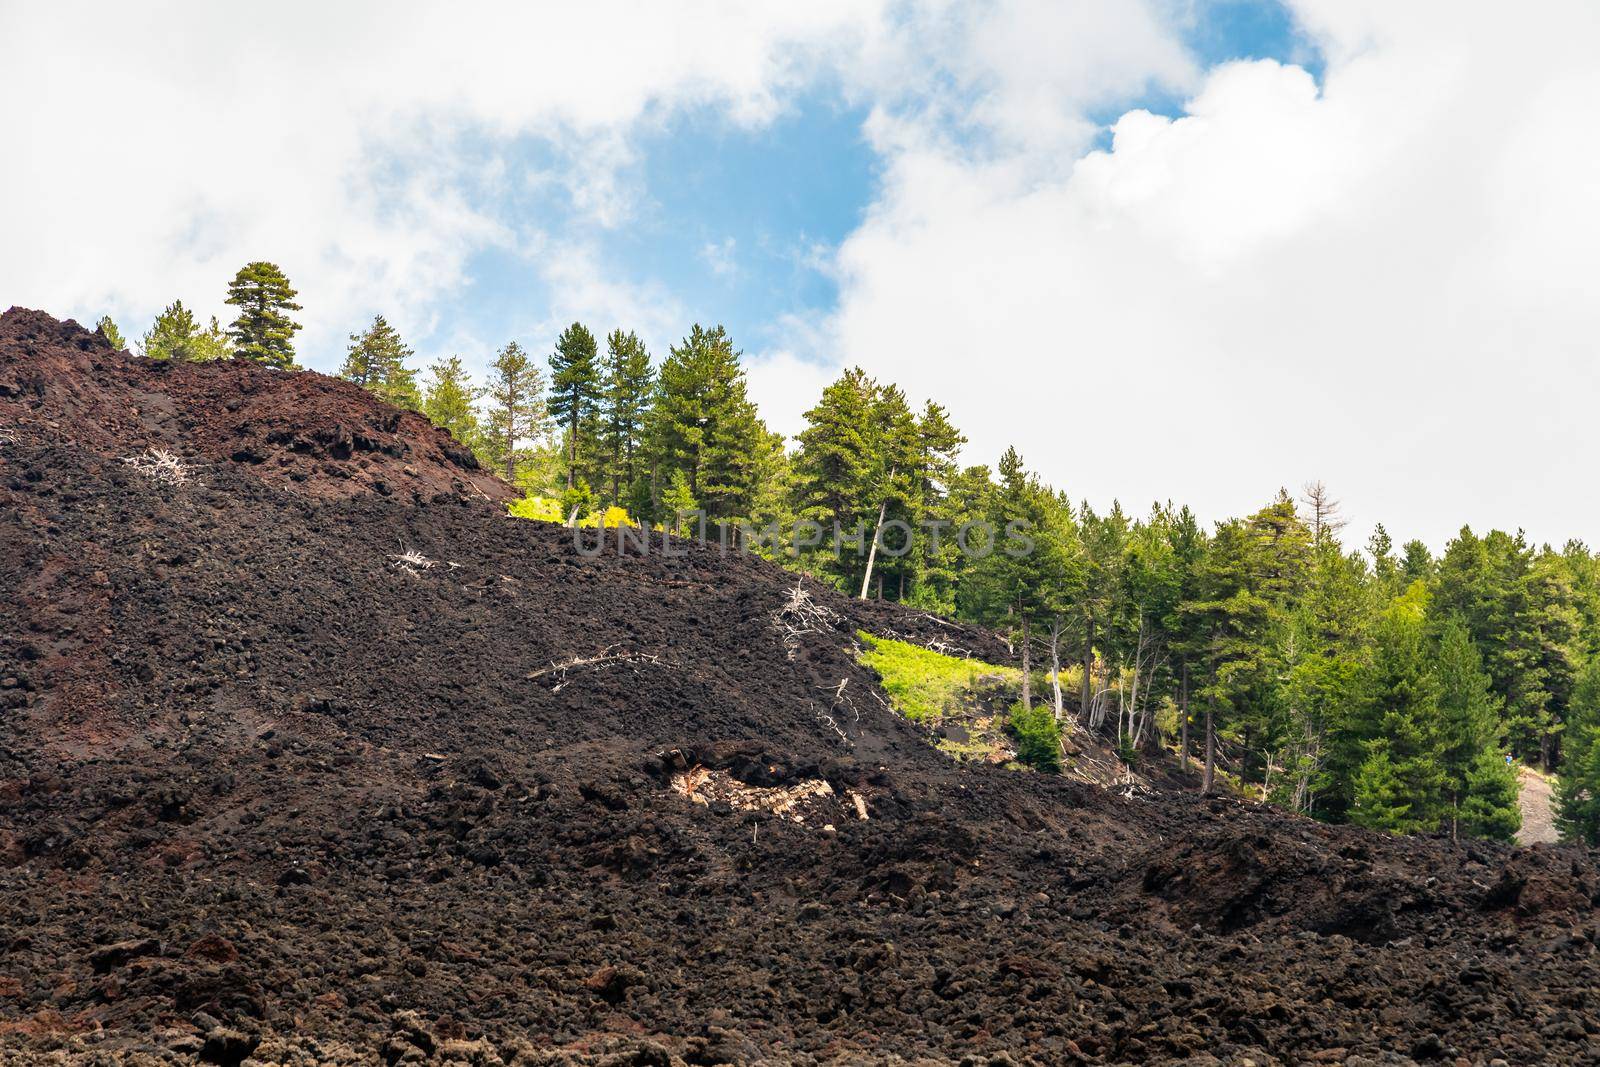 Mount Etna volcanic landscape and its typical vegetation, Sicily by mauricallari